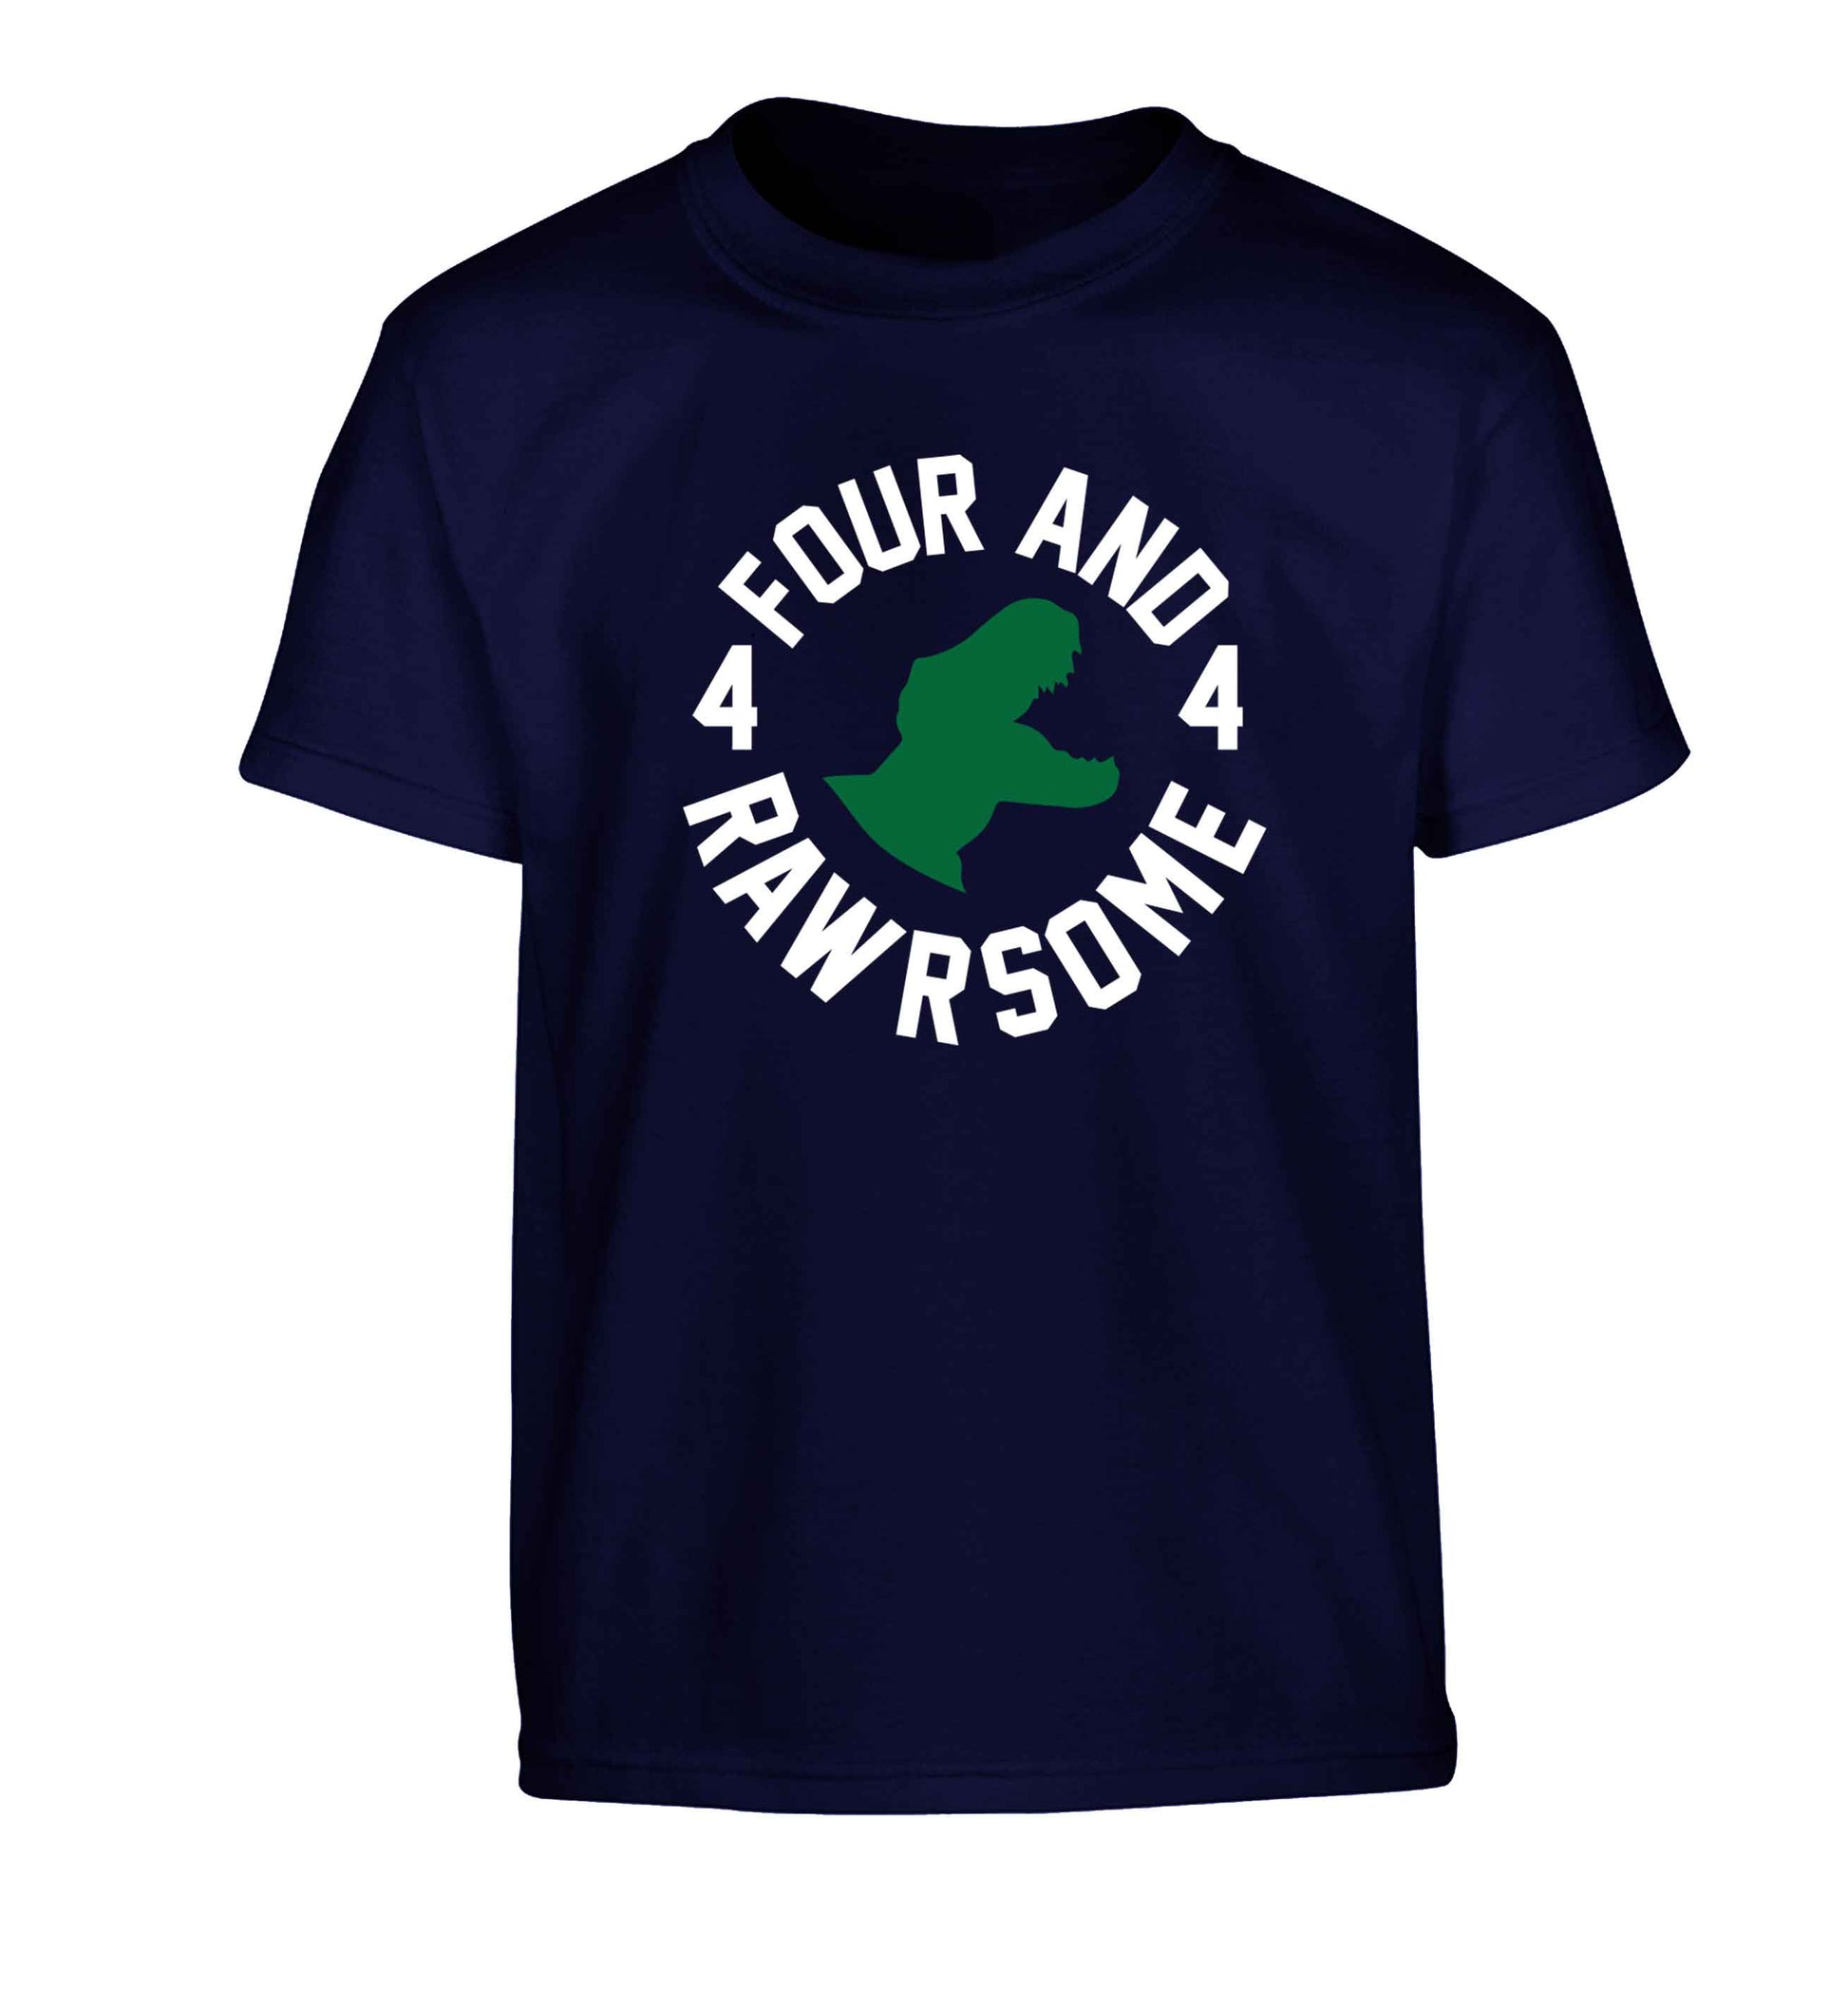 Four and rawrsome Children's navy Tshirt 12-13 Years